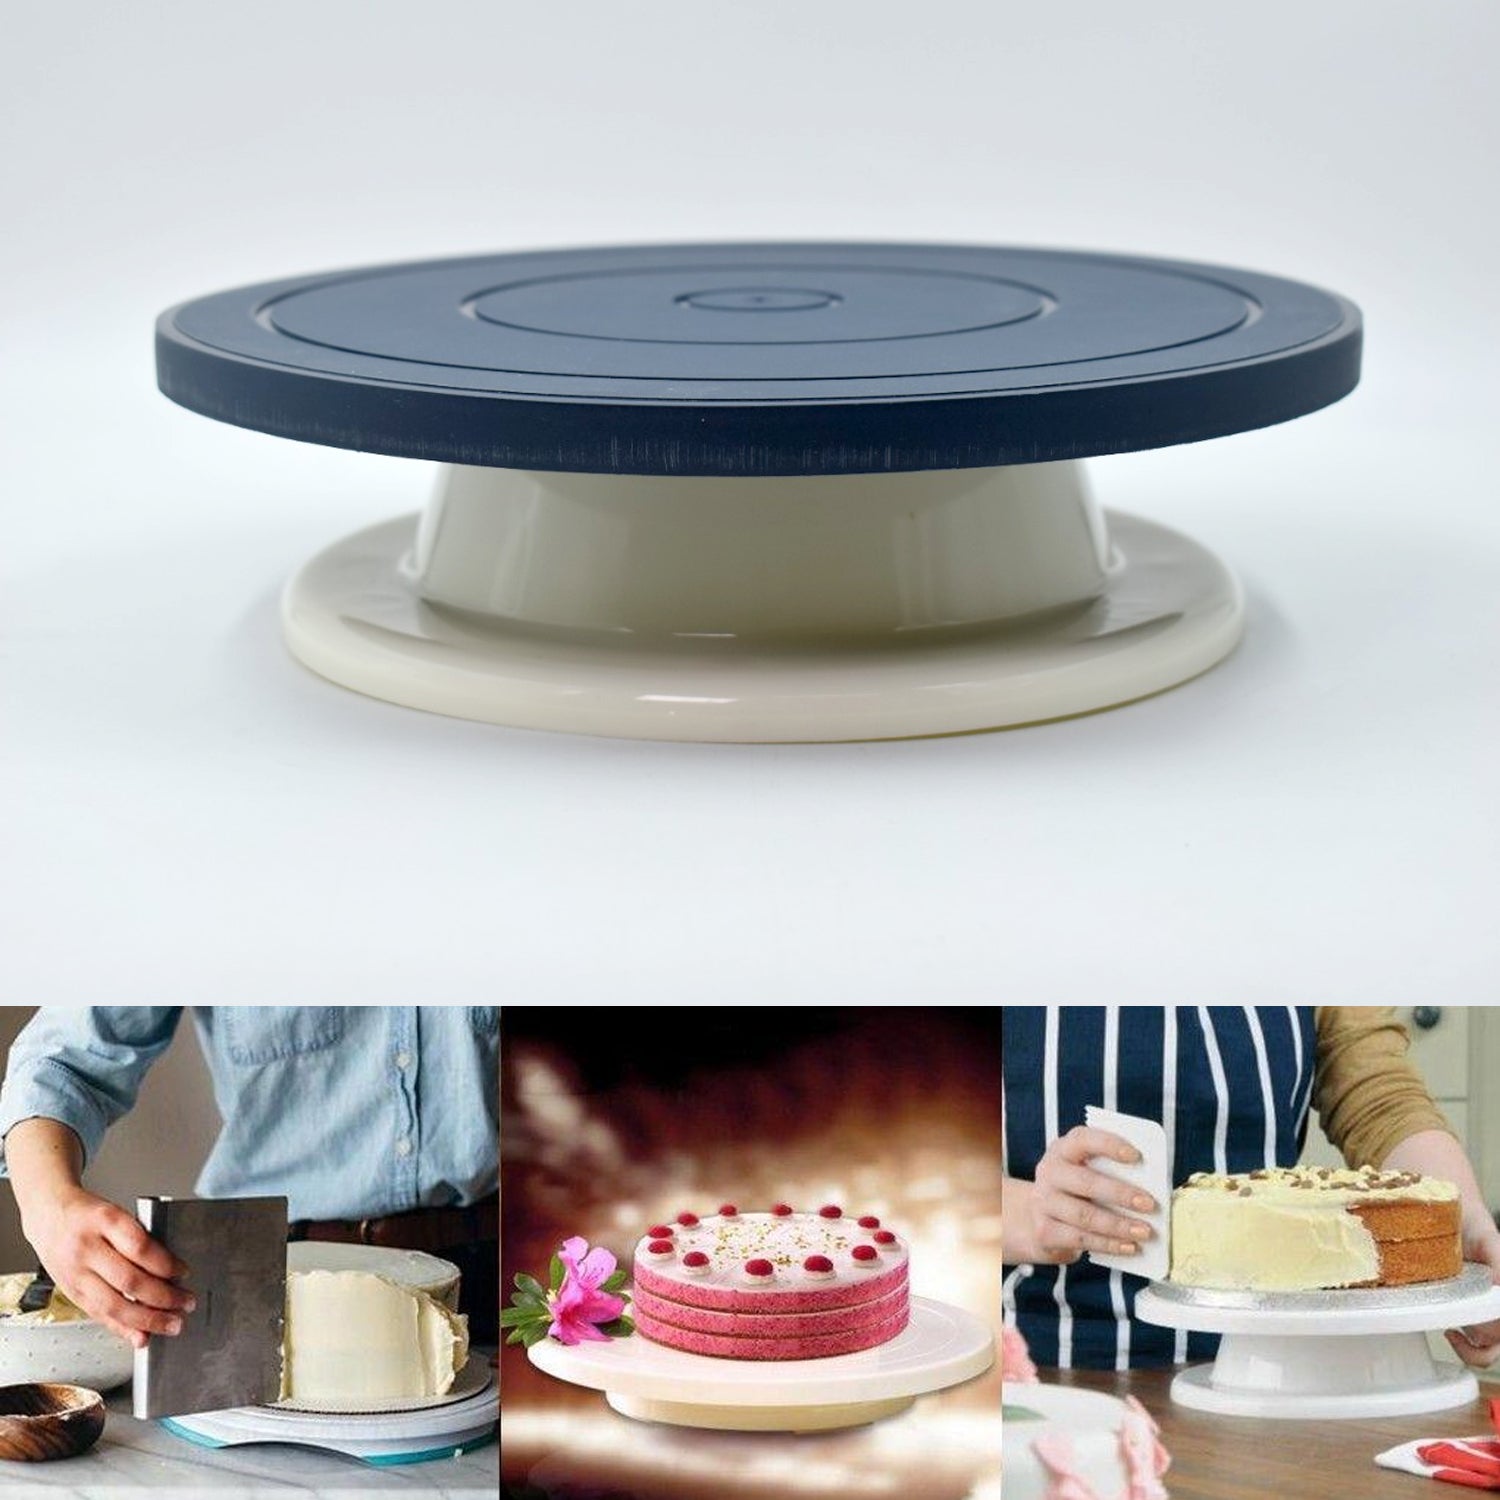 2734 Cake Blue Turntable used widely in bakeries and some of the household places while making and decorating cake and all purposes. freeshipping - DeoDap